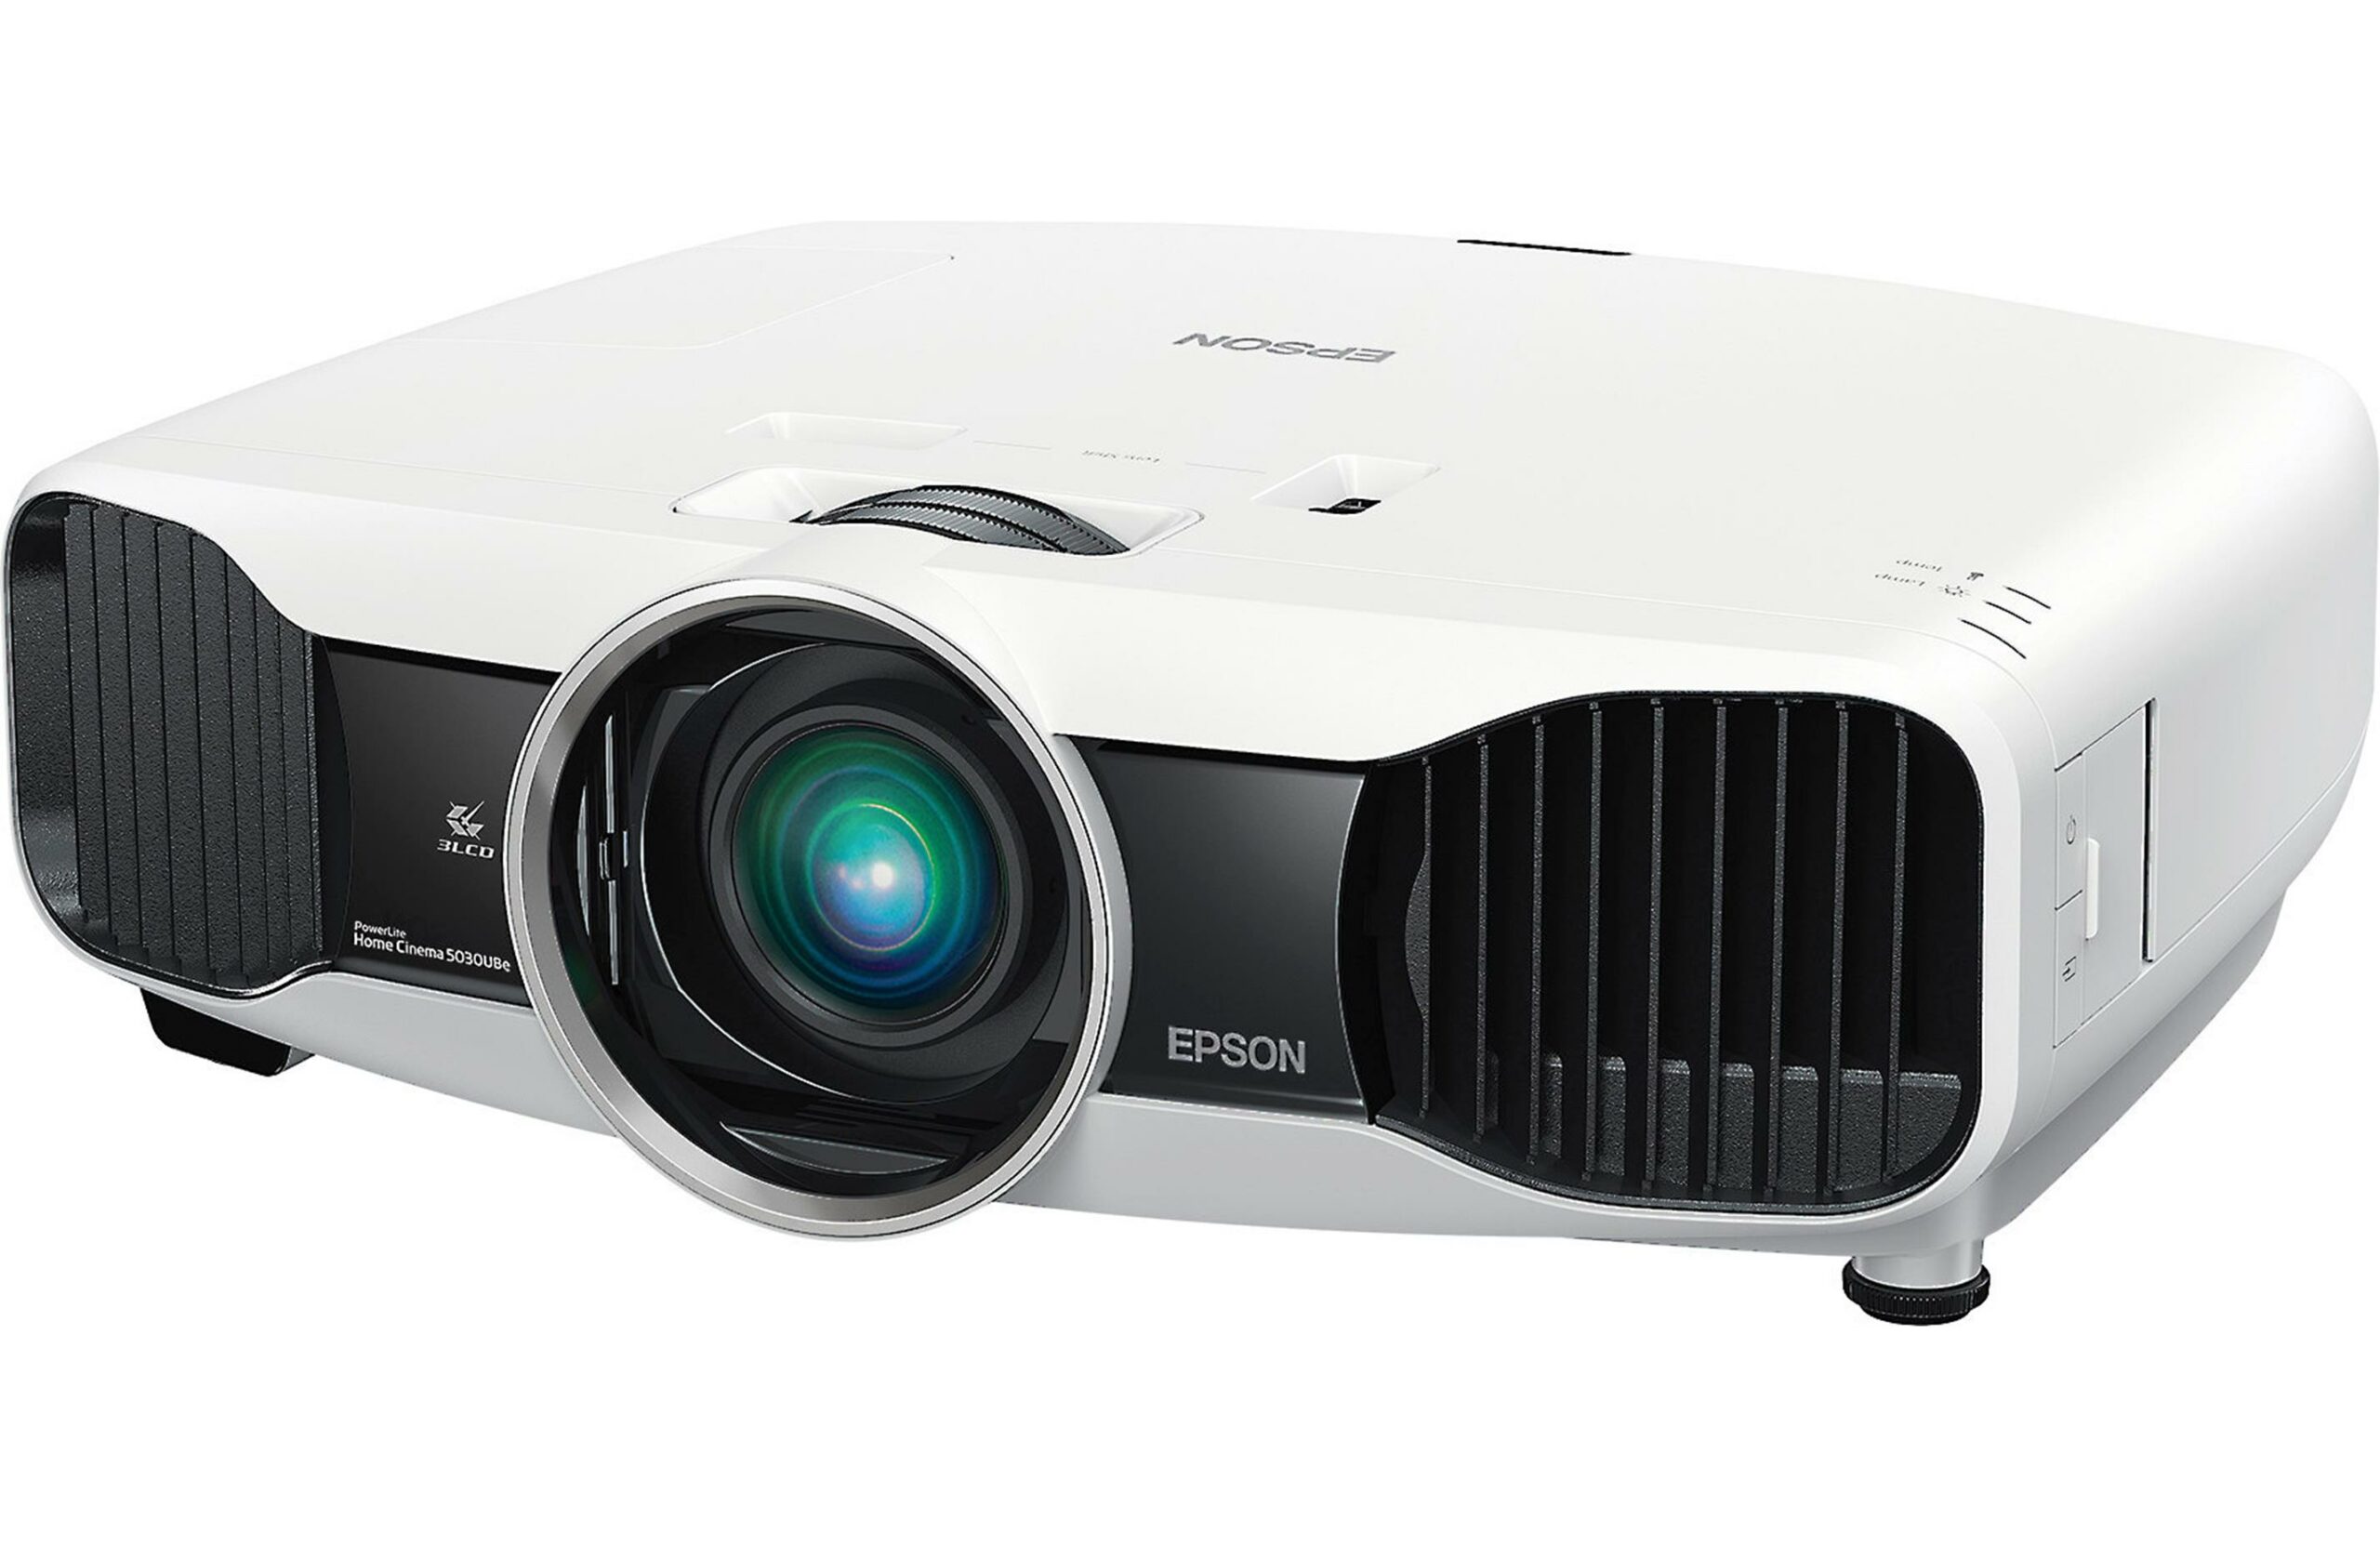 Is A Home Theater Projector System Better Than A Large Screen HDTV?